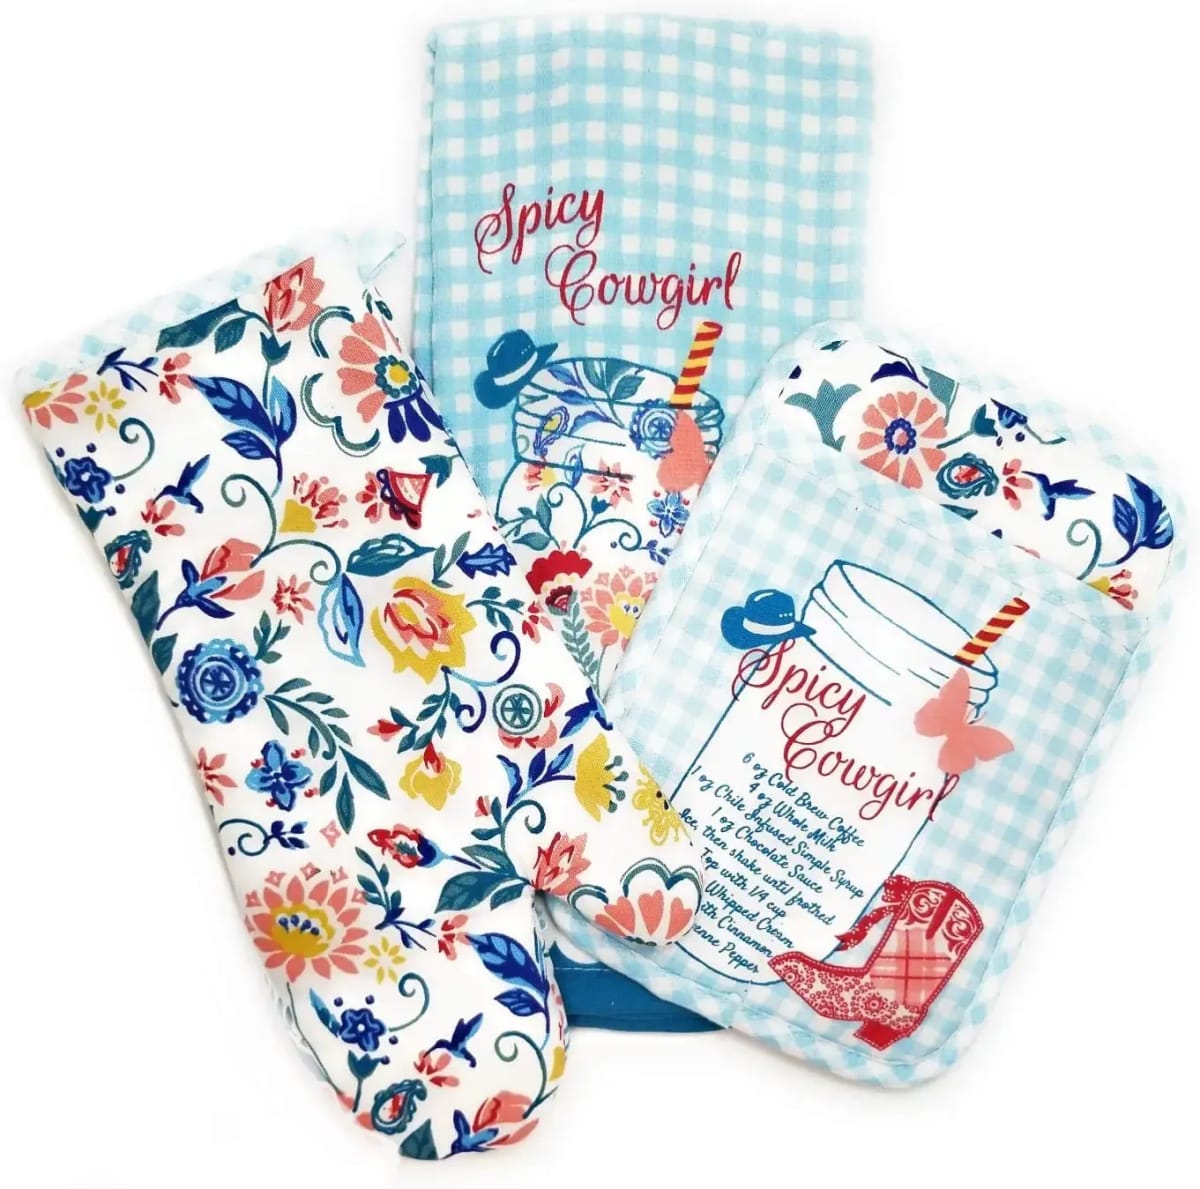 Spicy Cowgirl Kitchen Towel Set-3 Pieces Including Oven Mitt